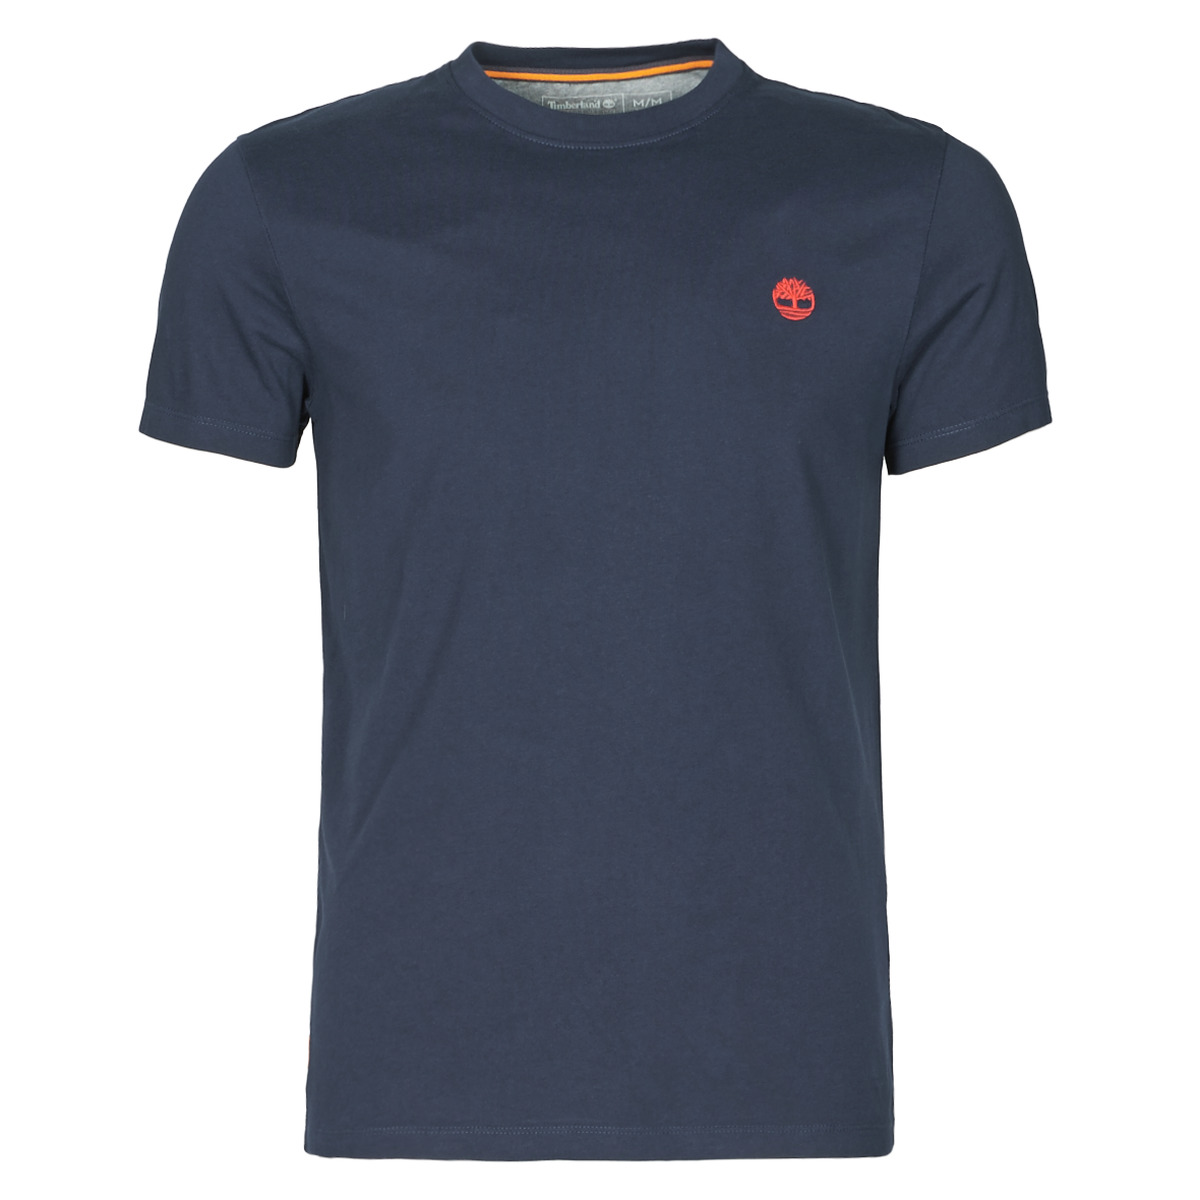 - | Men Timberland - RIVER DUNSTAN short-sleeved SLIM 33,00 t-shirts TEE Europe Fast Marine SS € POCKET delivery Spartoo Clothing !